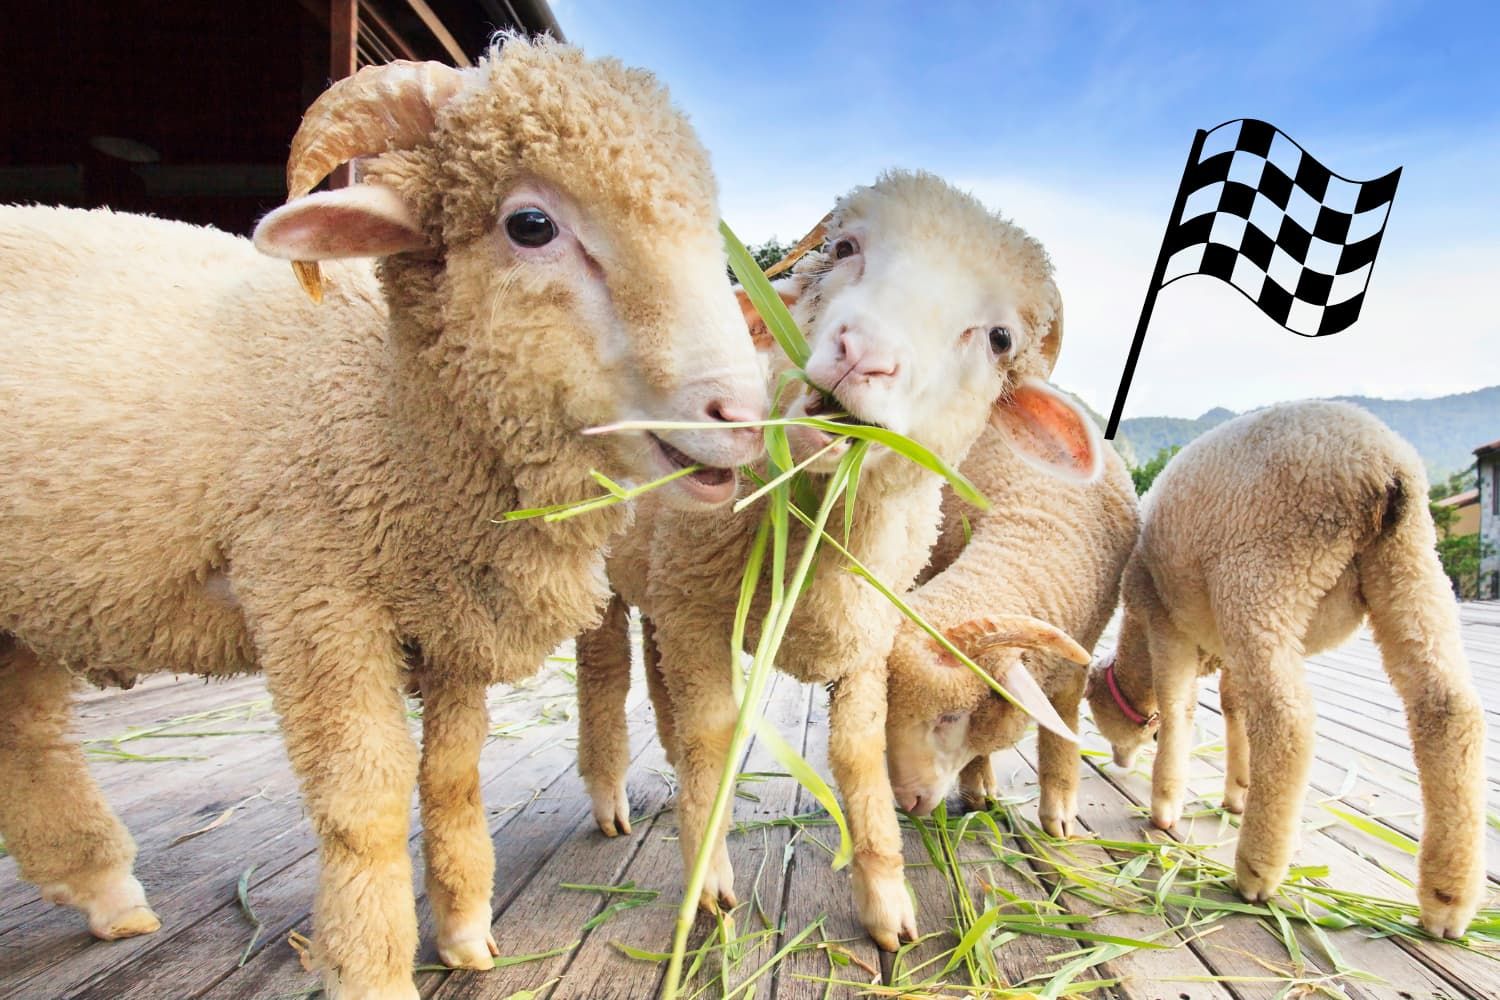 Game%20-%20OT%20Psalm%2023%20-%20The%20feed%20the%20sheep%20relay%20race-6bb58723 Light / dark